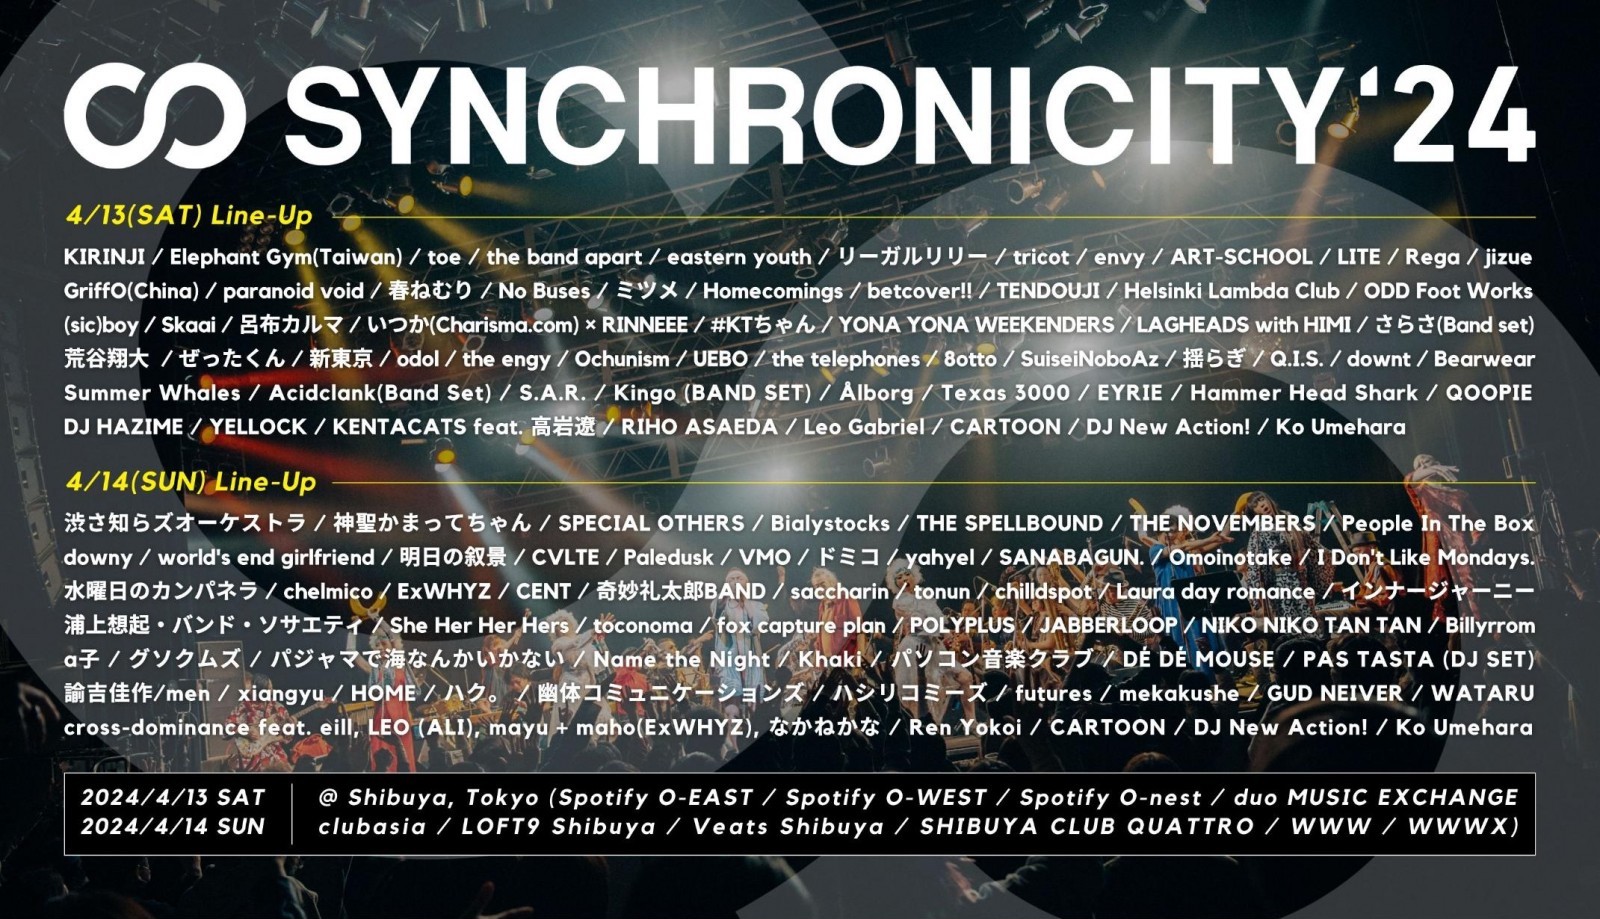 Kulture Inc, is participated in the music festival "SYNCHRONICITY" EXCO.